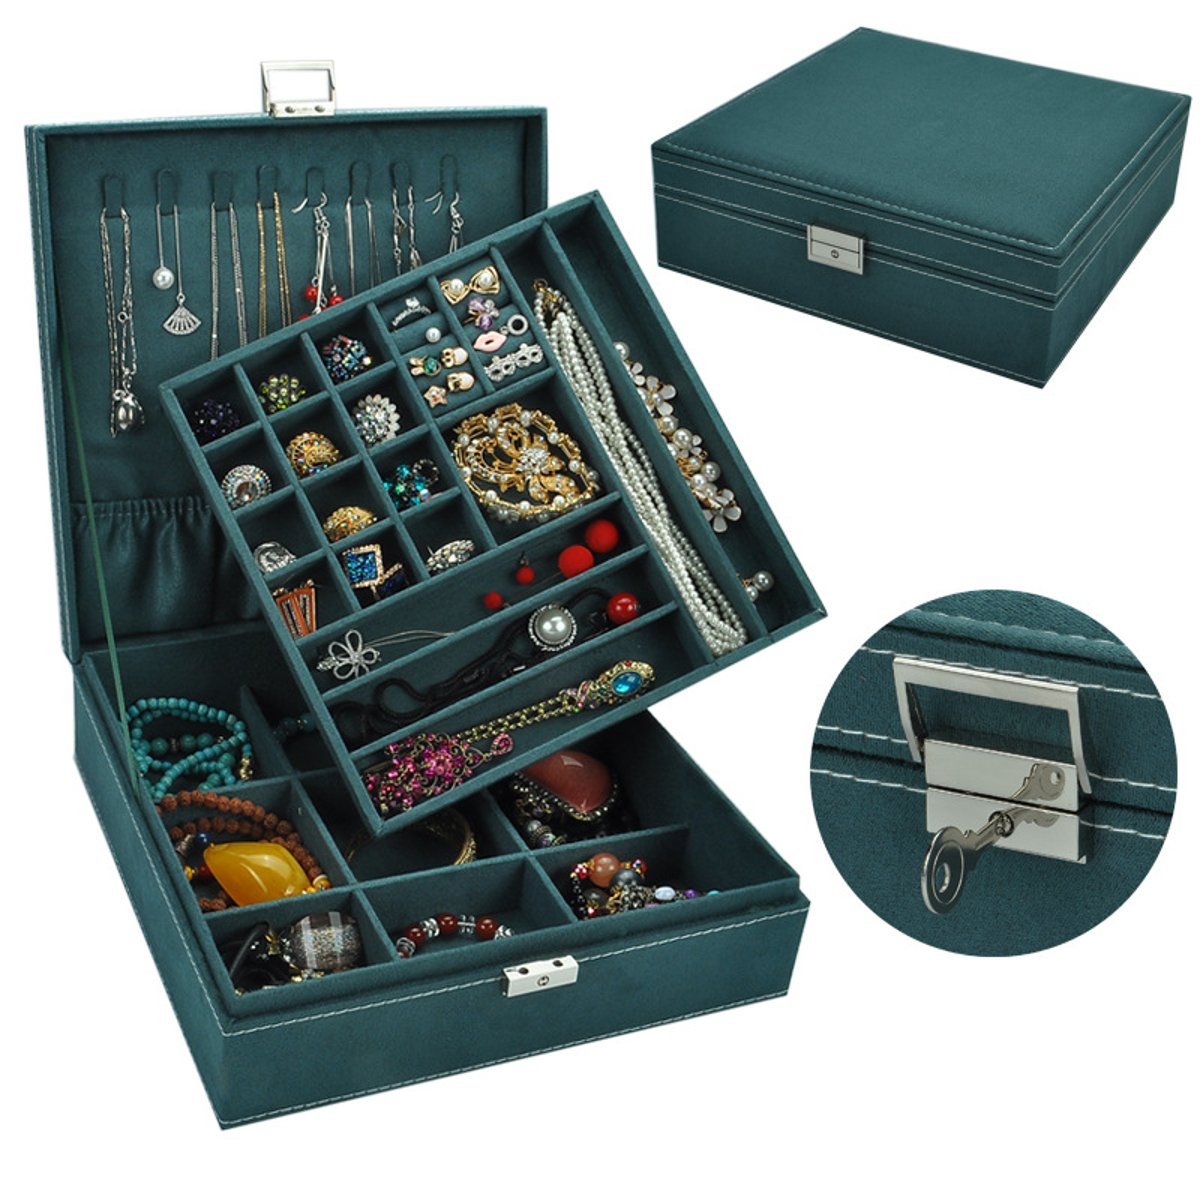 Multi-function-Vintage-Jewelry-Box-Organizers-Two-layer-Lockable-Jewelry-Display-Storage-Case-1855370-21